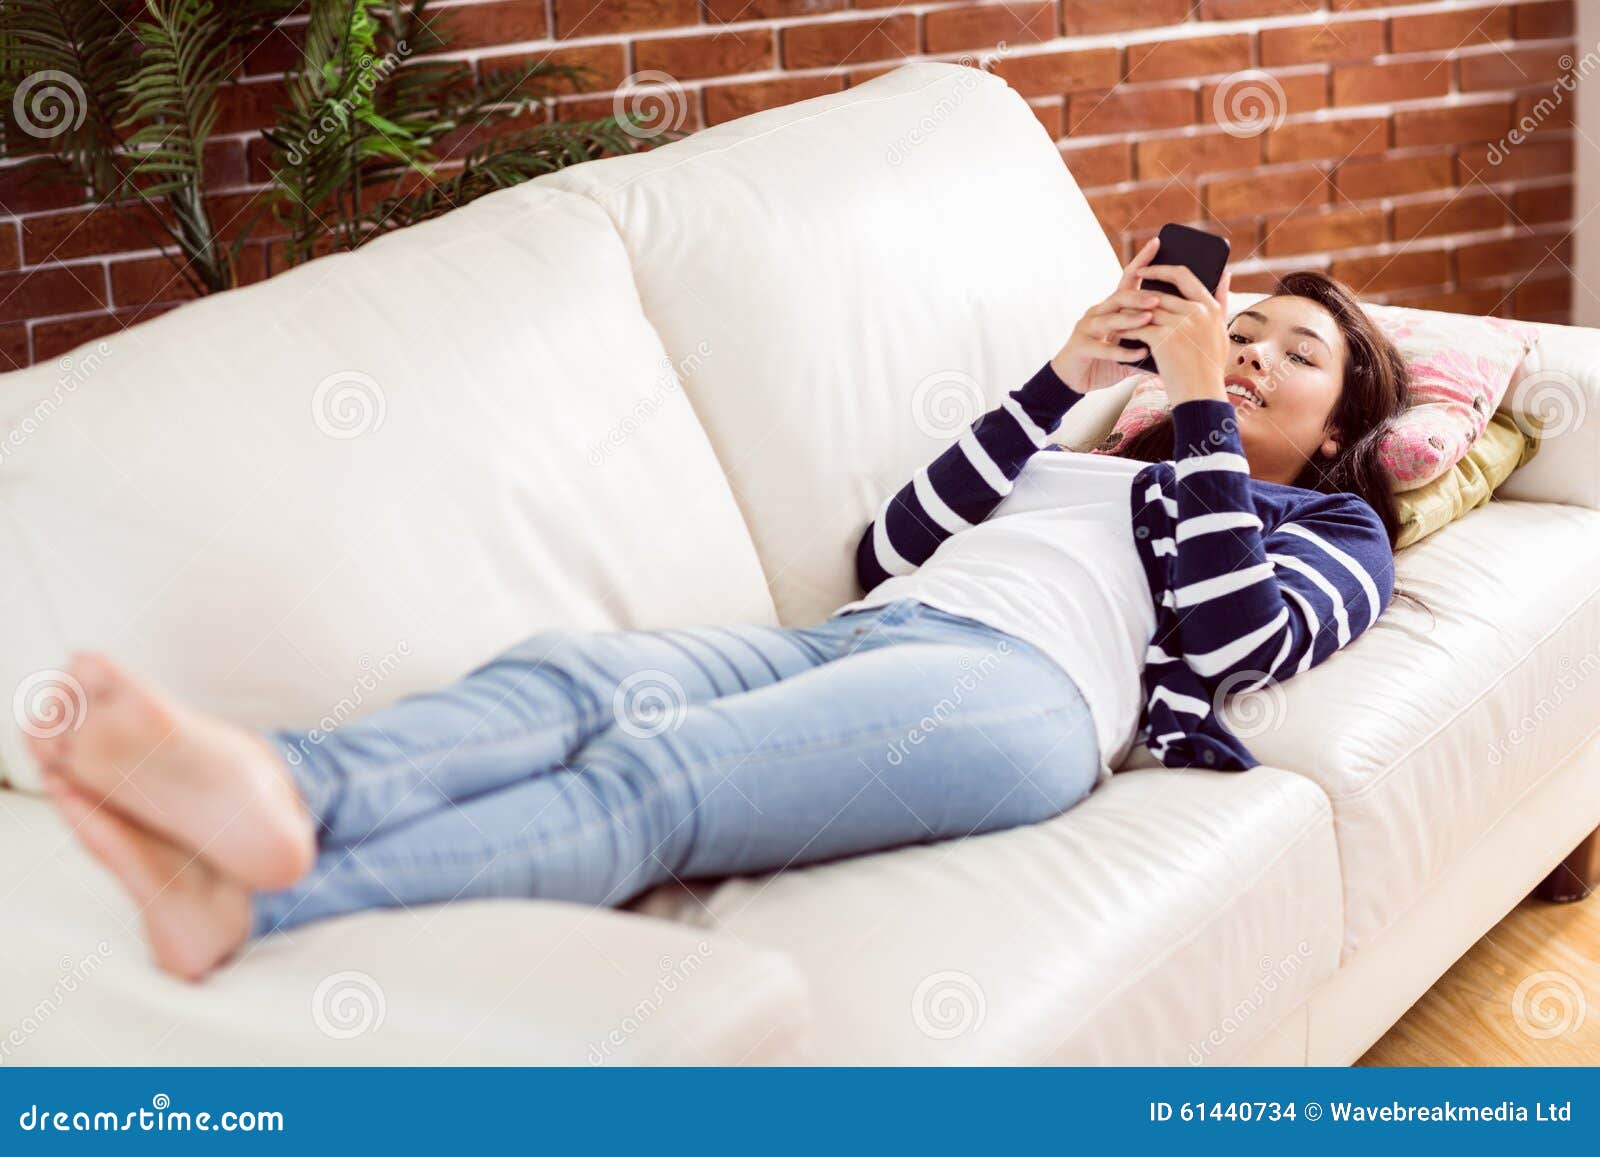 Asian Woman Lying On The Couch Using Phone Stock Photo Image Of